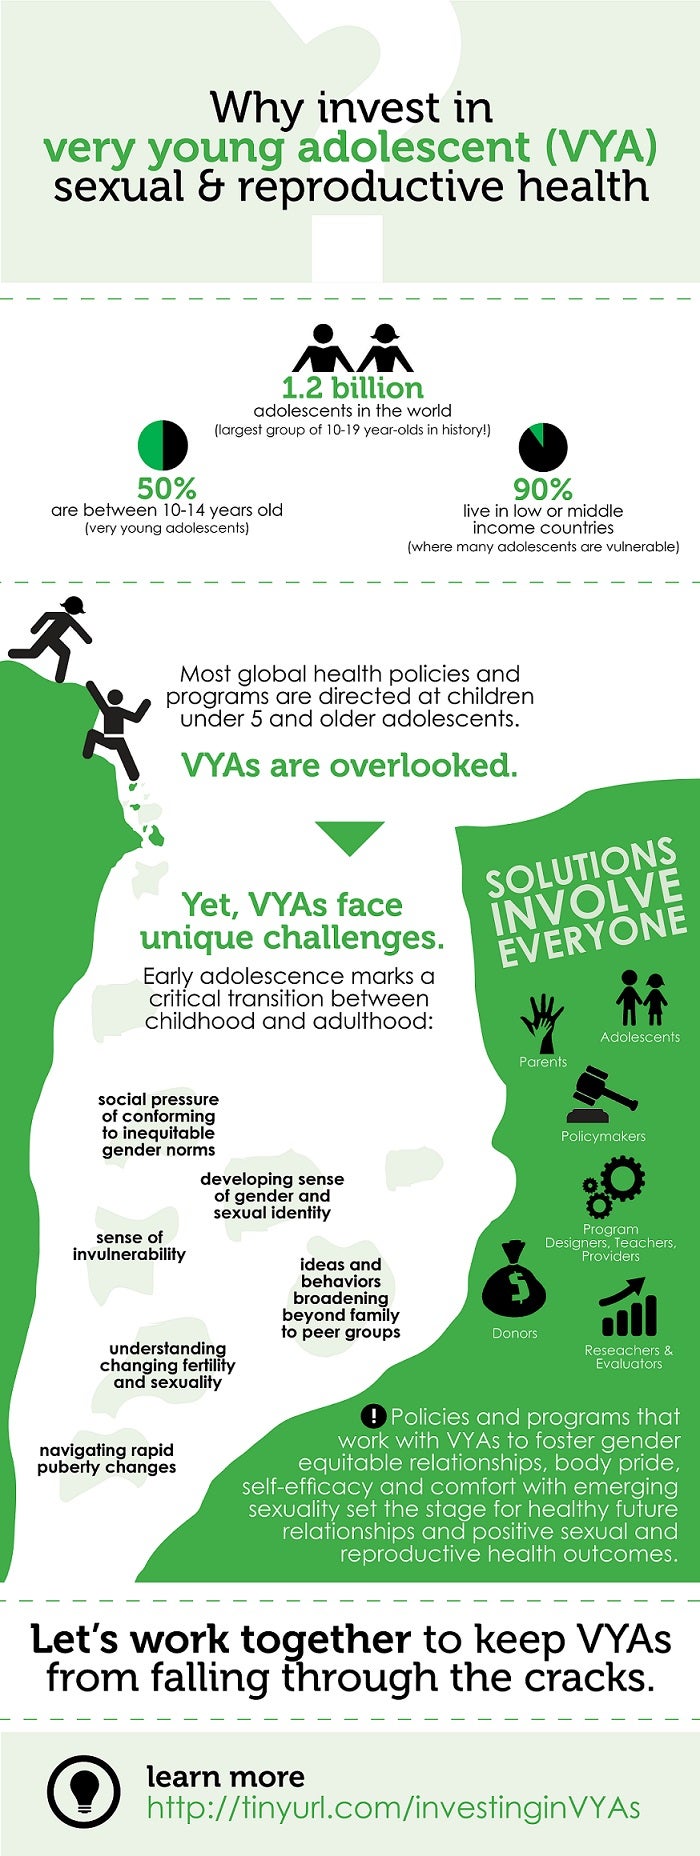 Why_Invest_in_VYA_SRH_IRH_Infographic_large